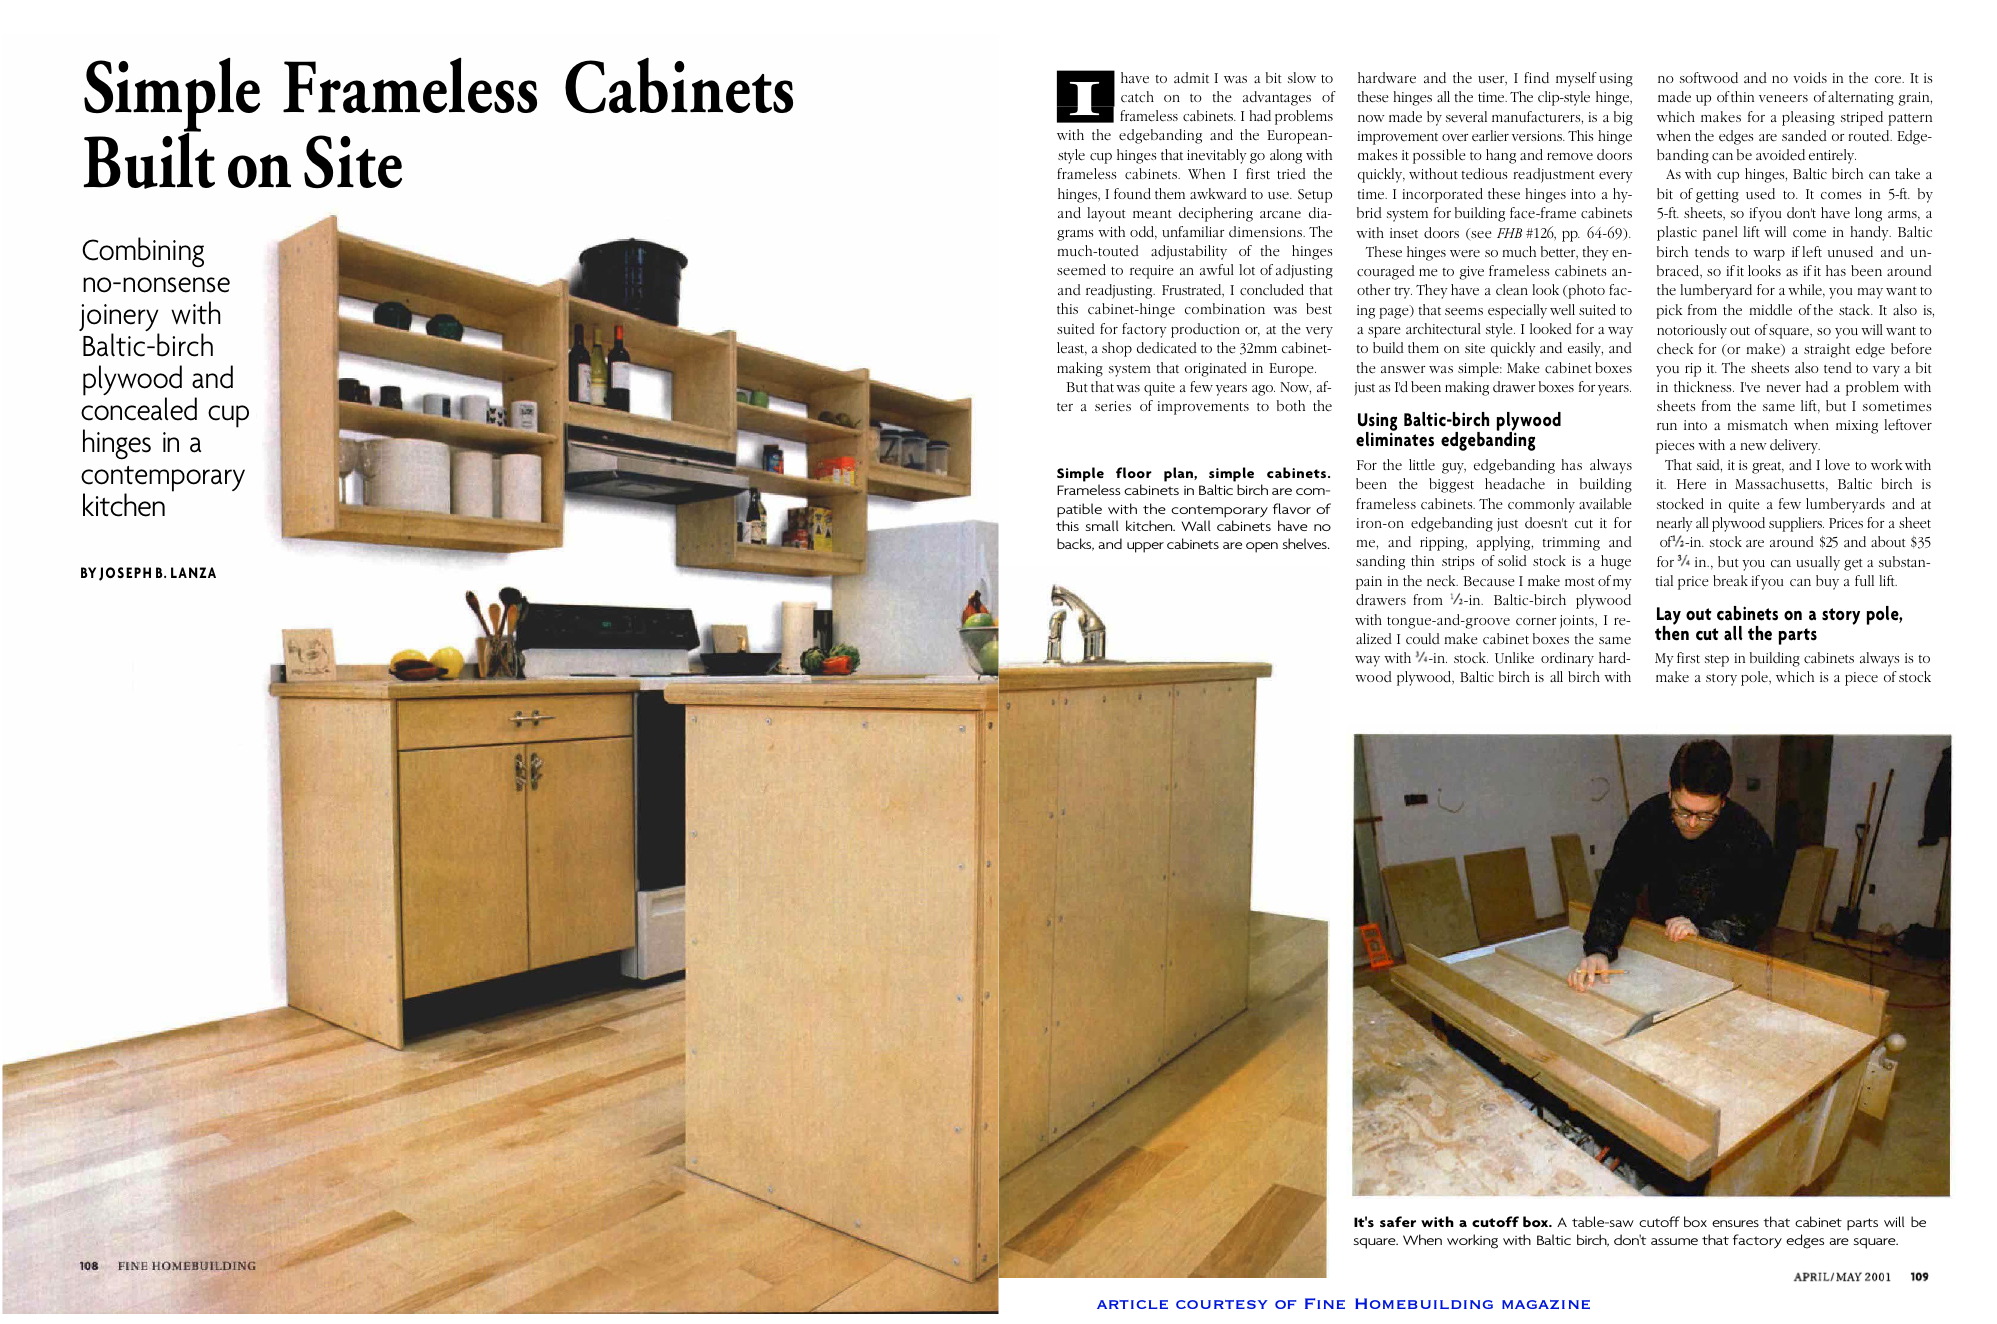 Simple Frameless Cabinets